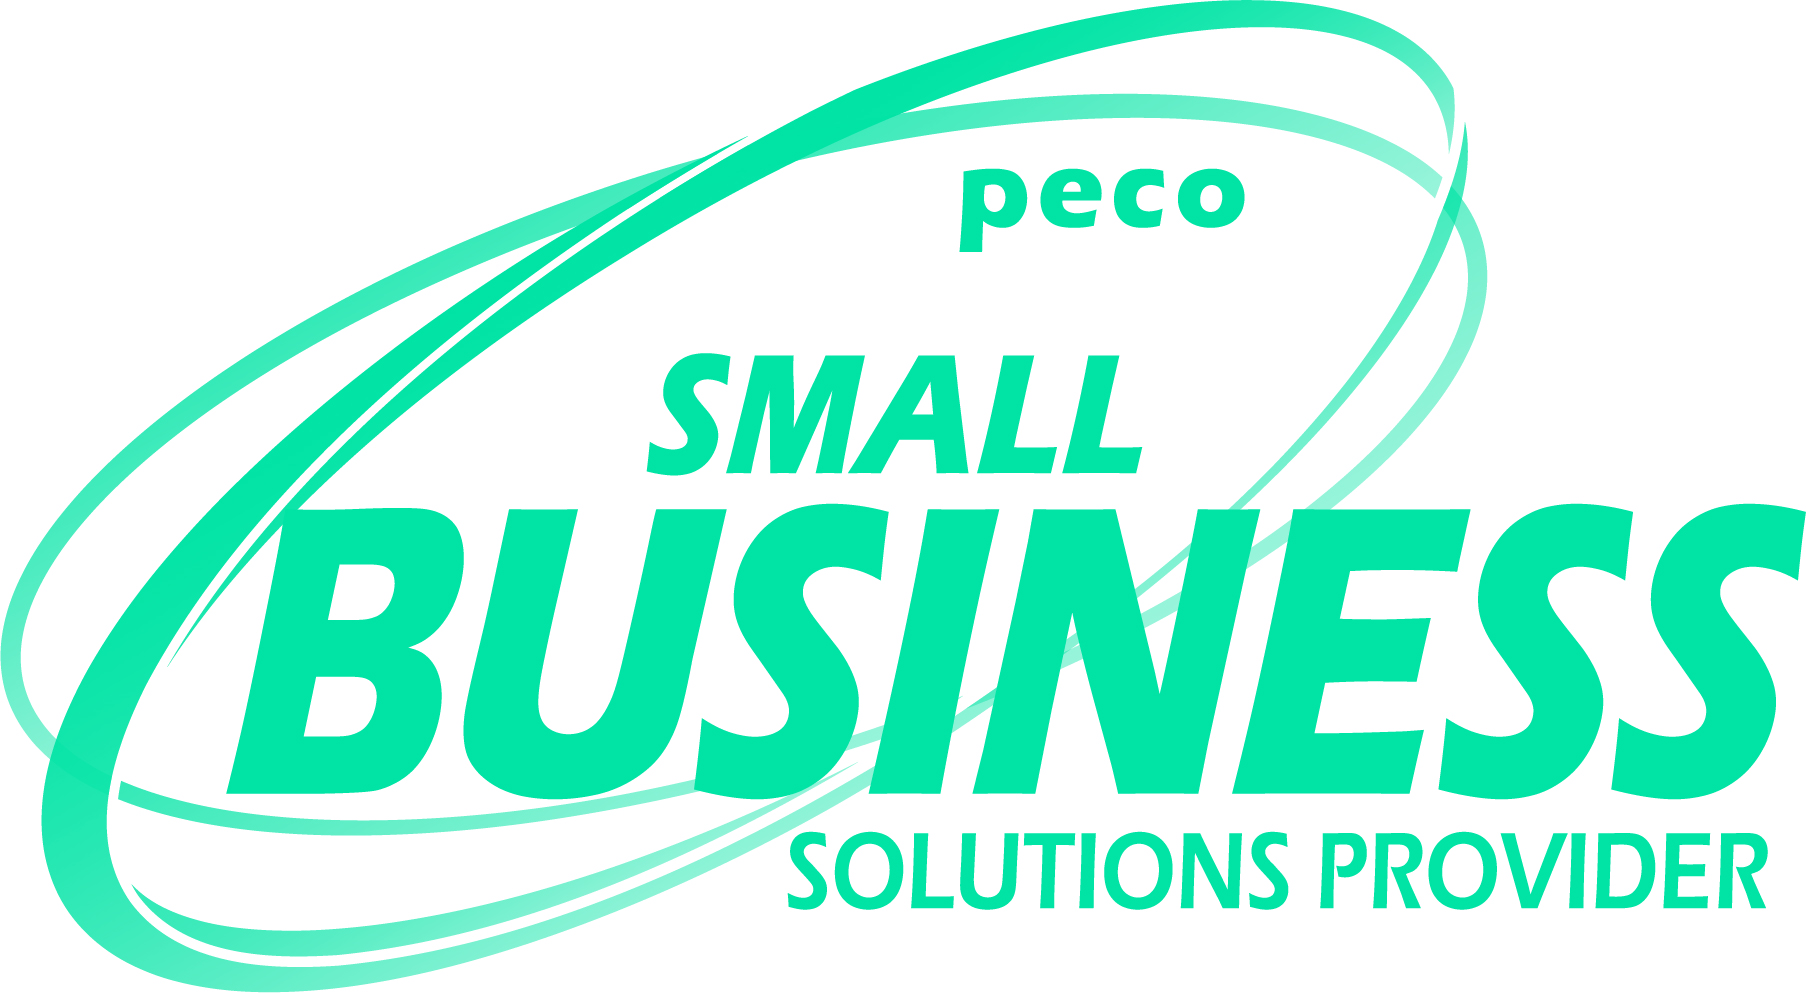 PECO Small Business Solutions